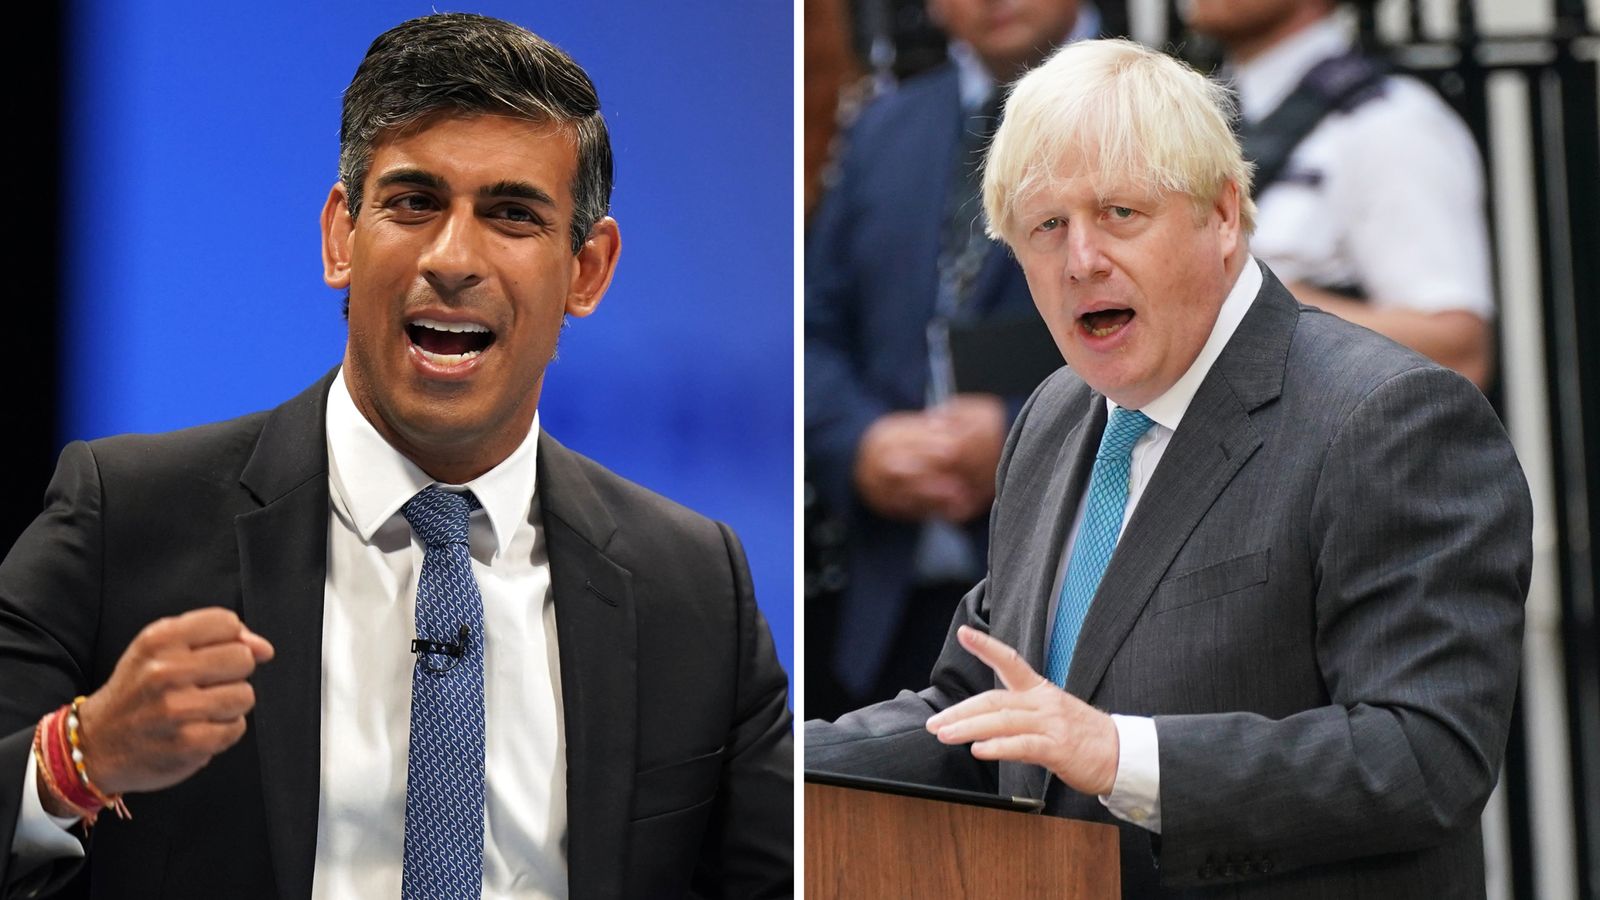 Sunak secures 100 backers in leadership race as Team Johnson claims former PM has also reached threshold